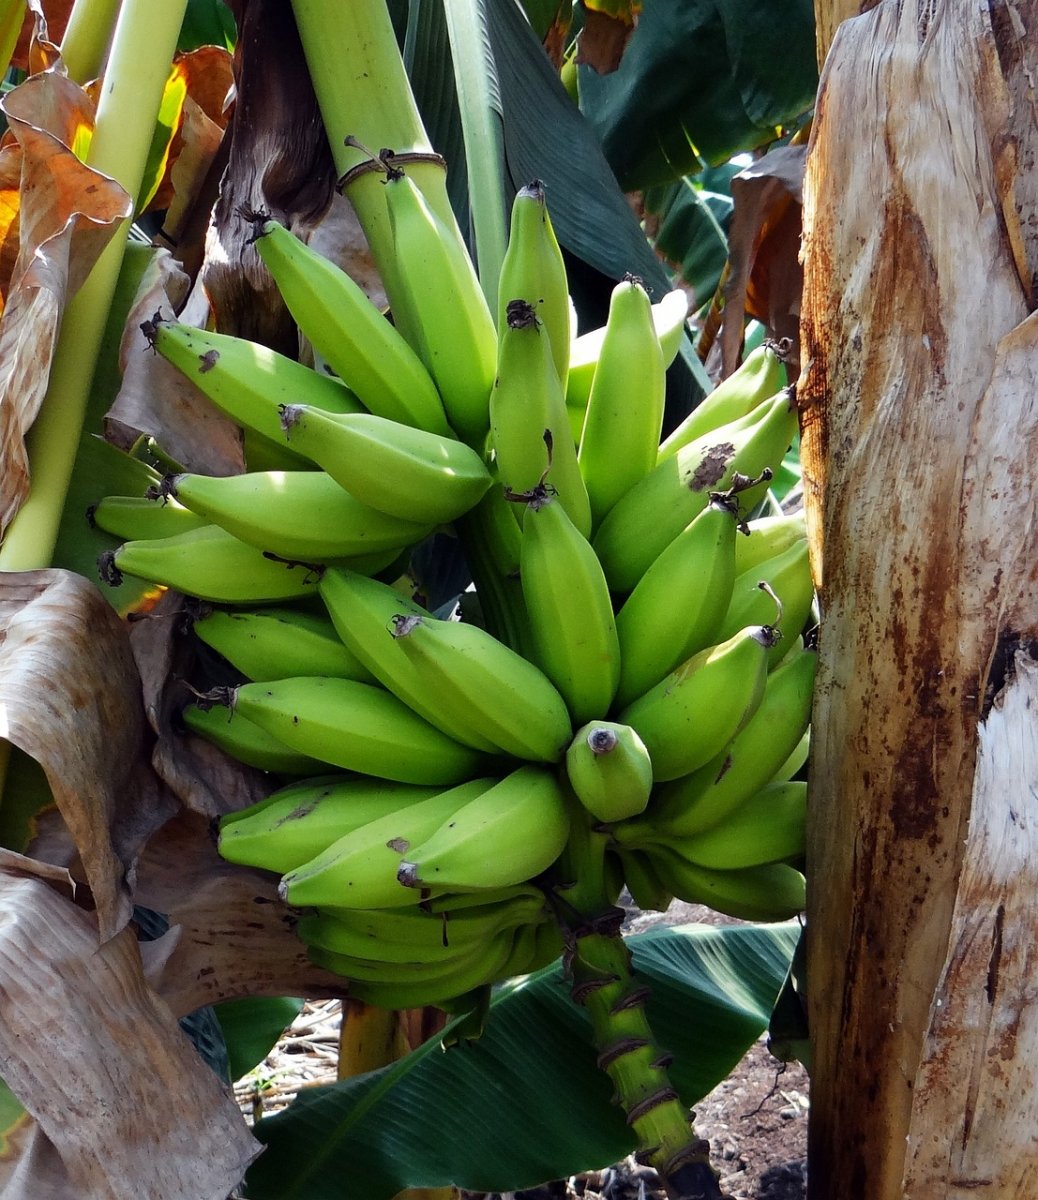 Plantain as a substitute for bananas.